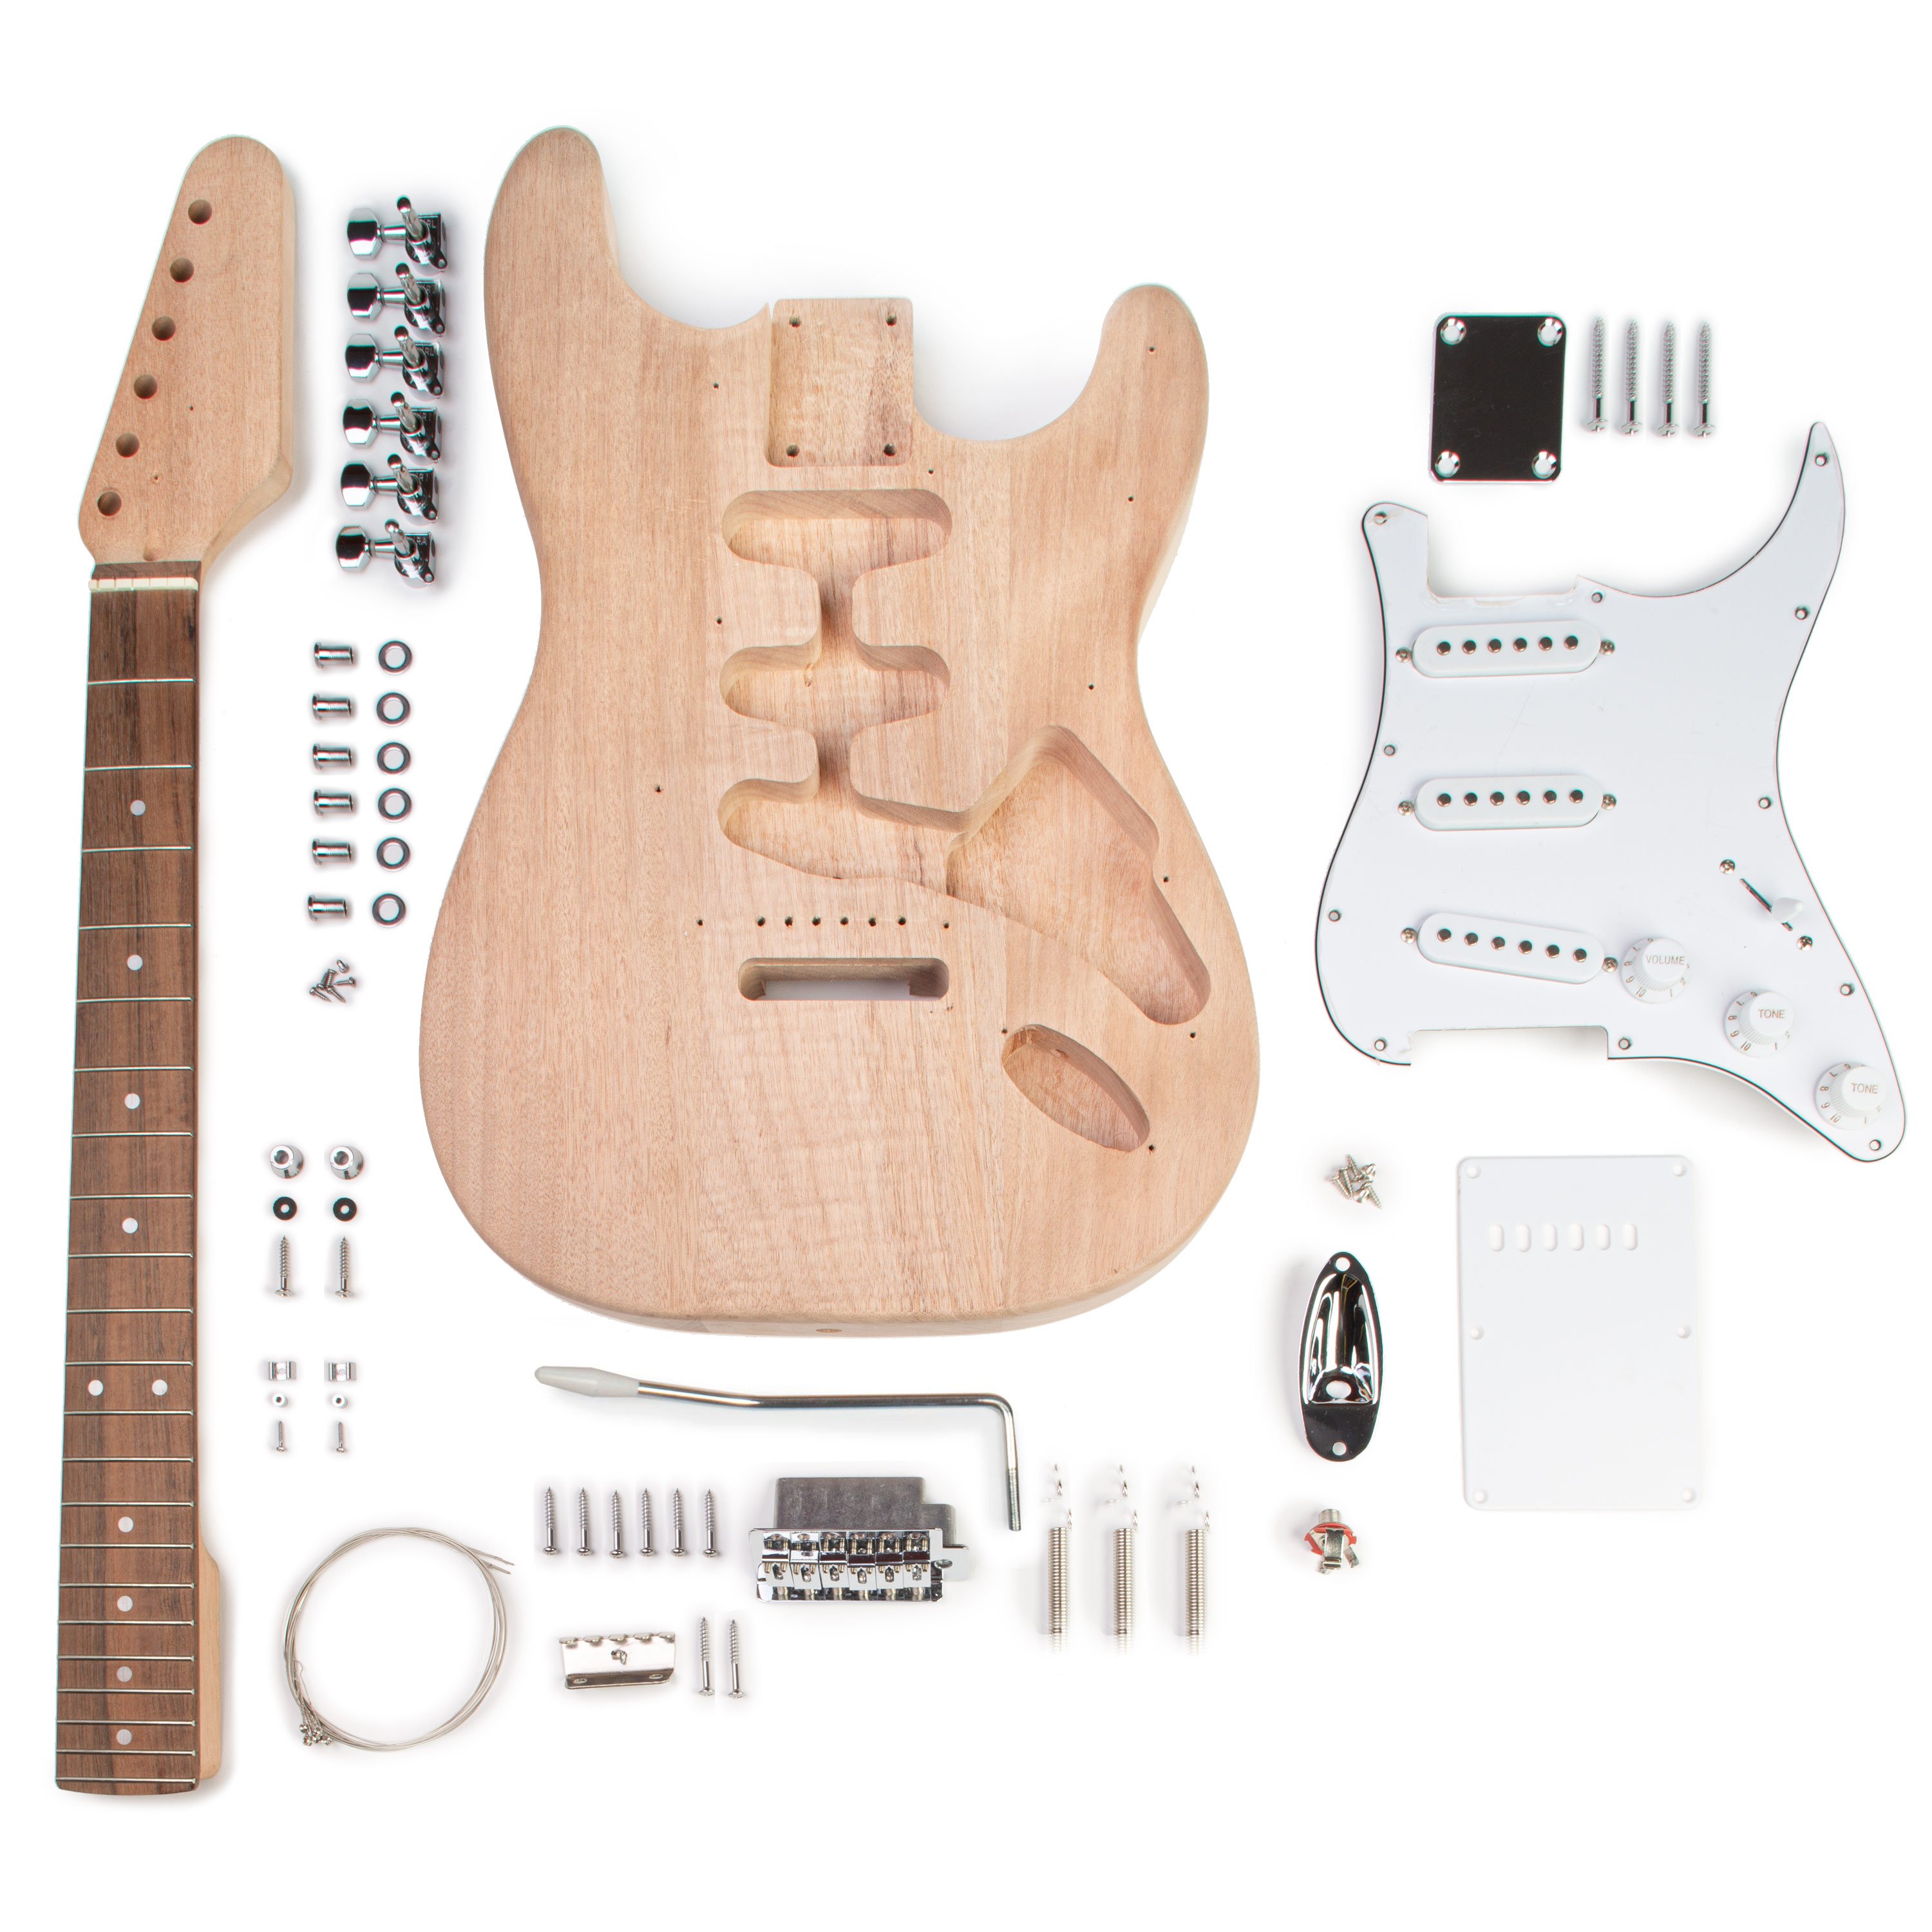 https://www.stewmac.com/globalassets/product-images/m004000/m004000/m004039-s-style-electric-guitar-kit/5281-2-parts-spread-on-white-3000.jpg?hash=637618691210000000